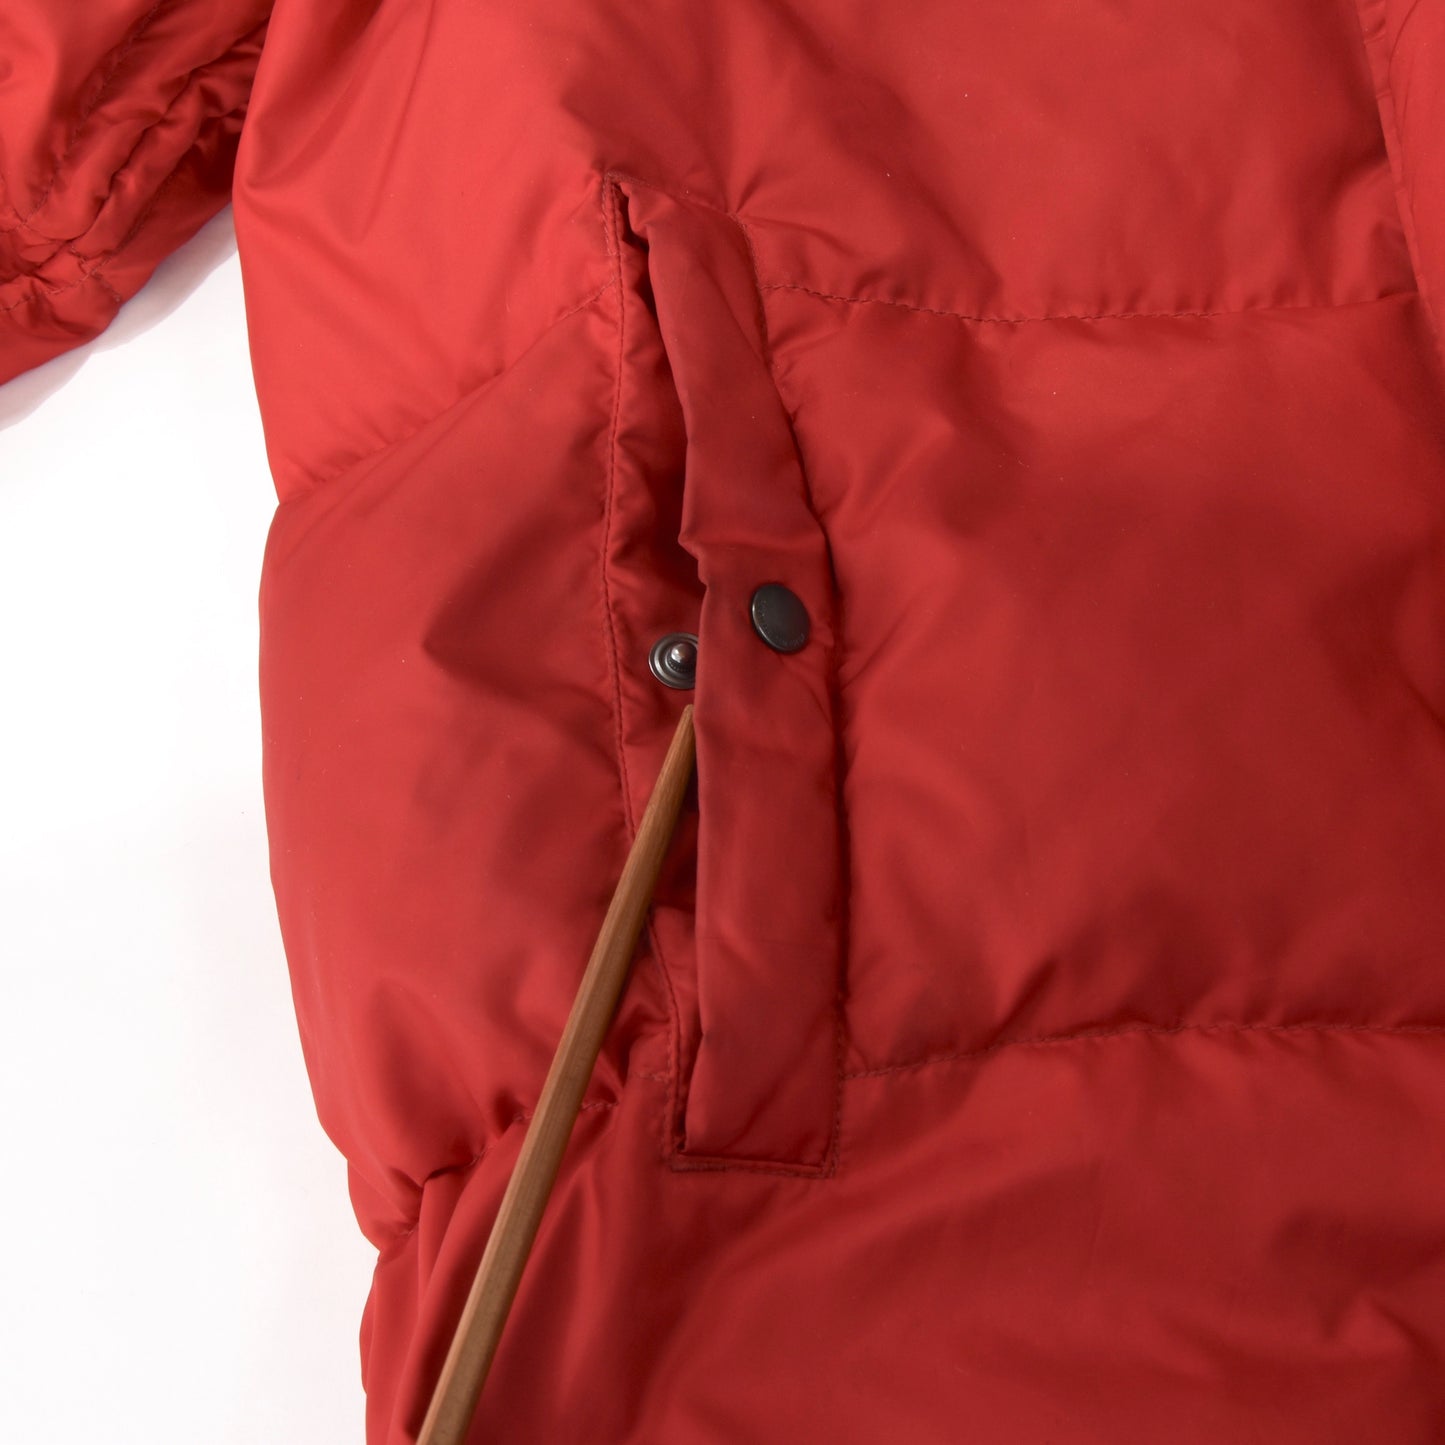 Polo Ralph Lauren Down Jacket Size M - Red